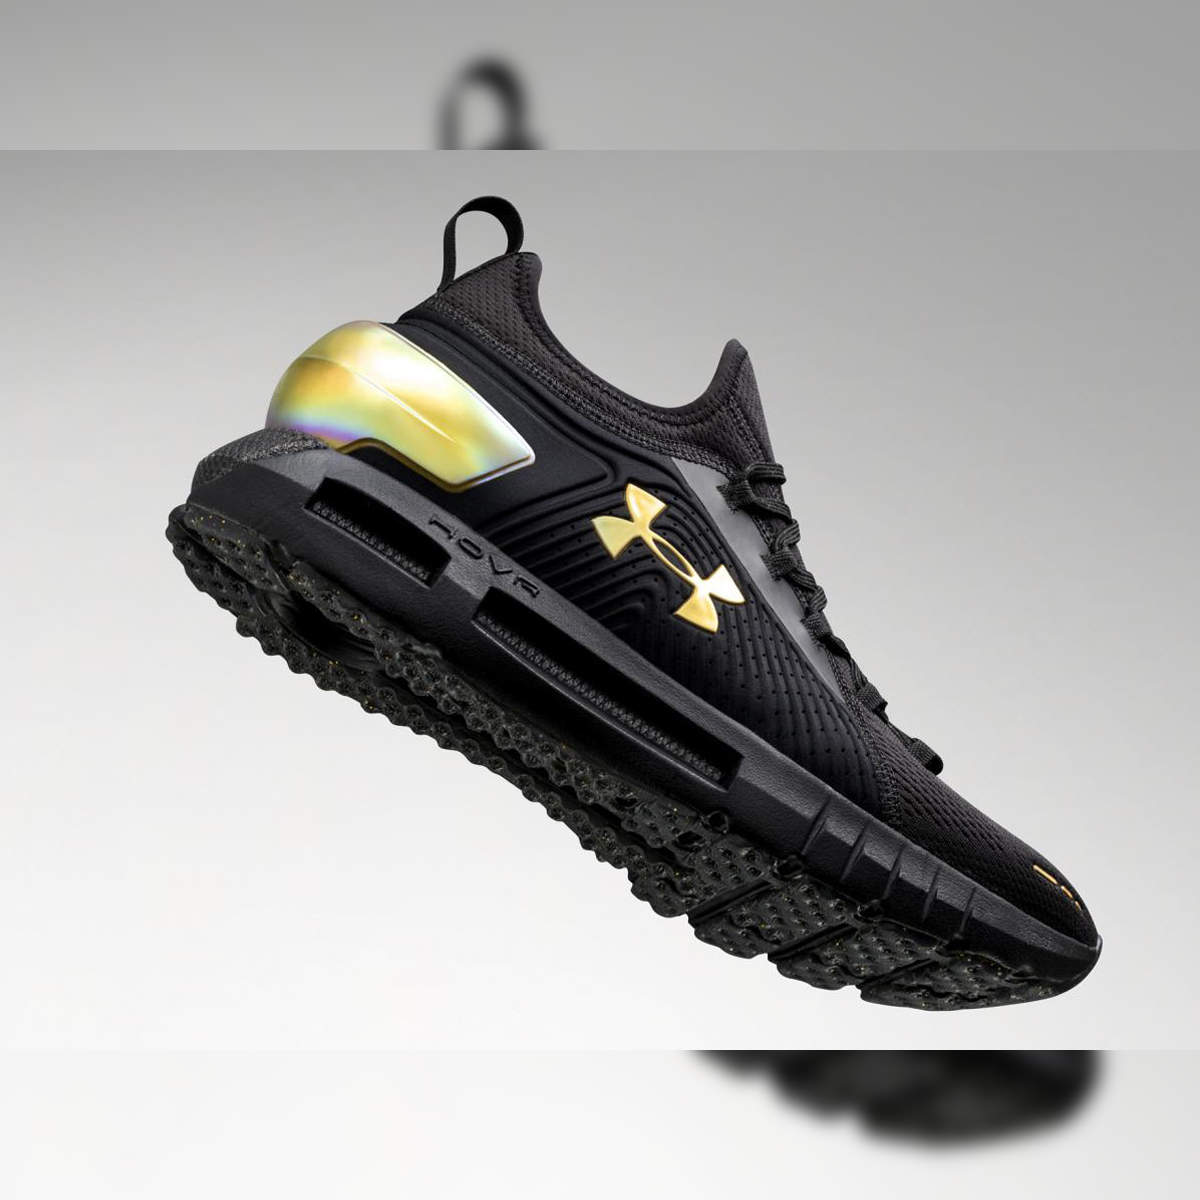 Under Armour: Under Armour HOVR Phantom SE review: Lightweight and smart  Bluetooth running shoes - The Economic Times